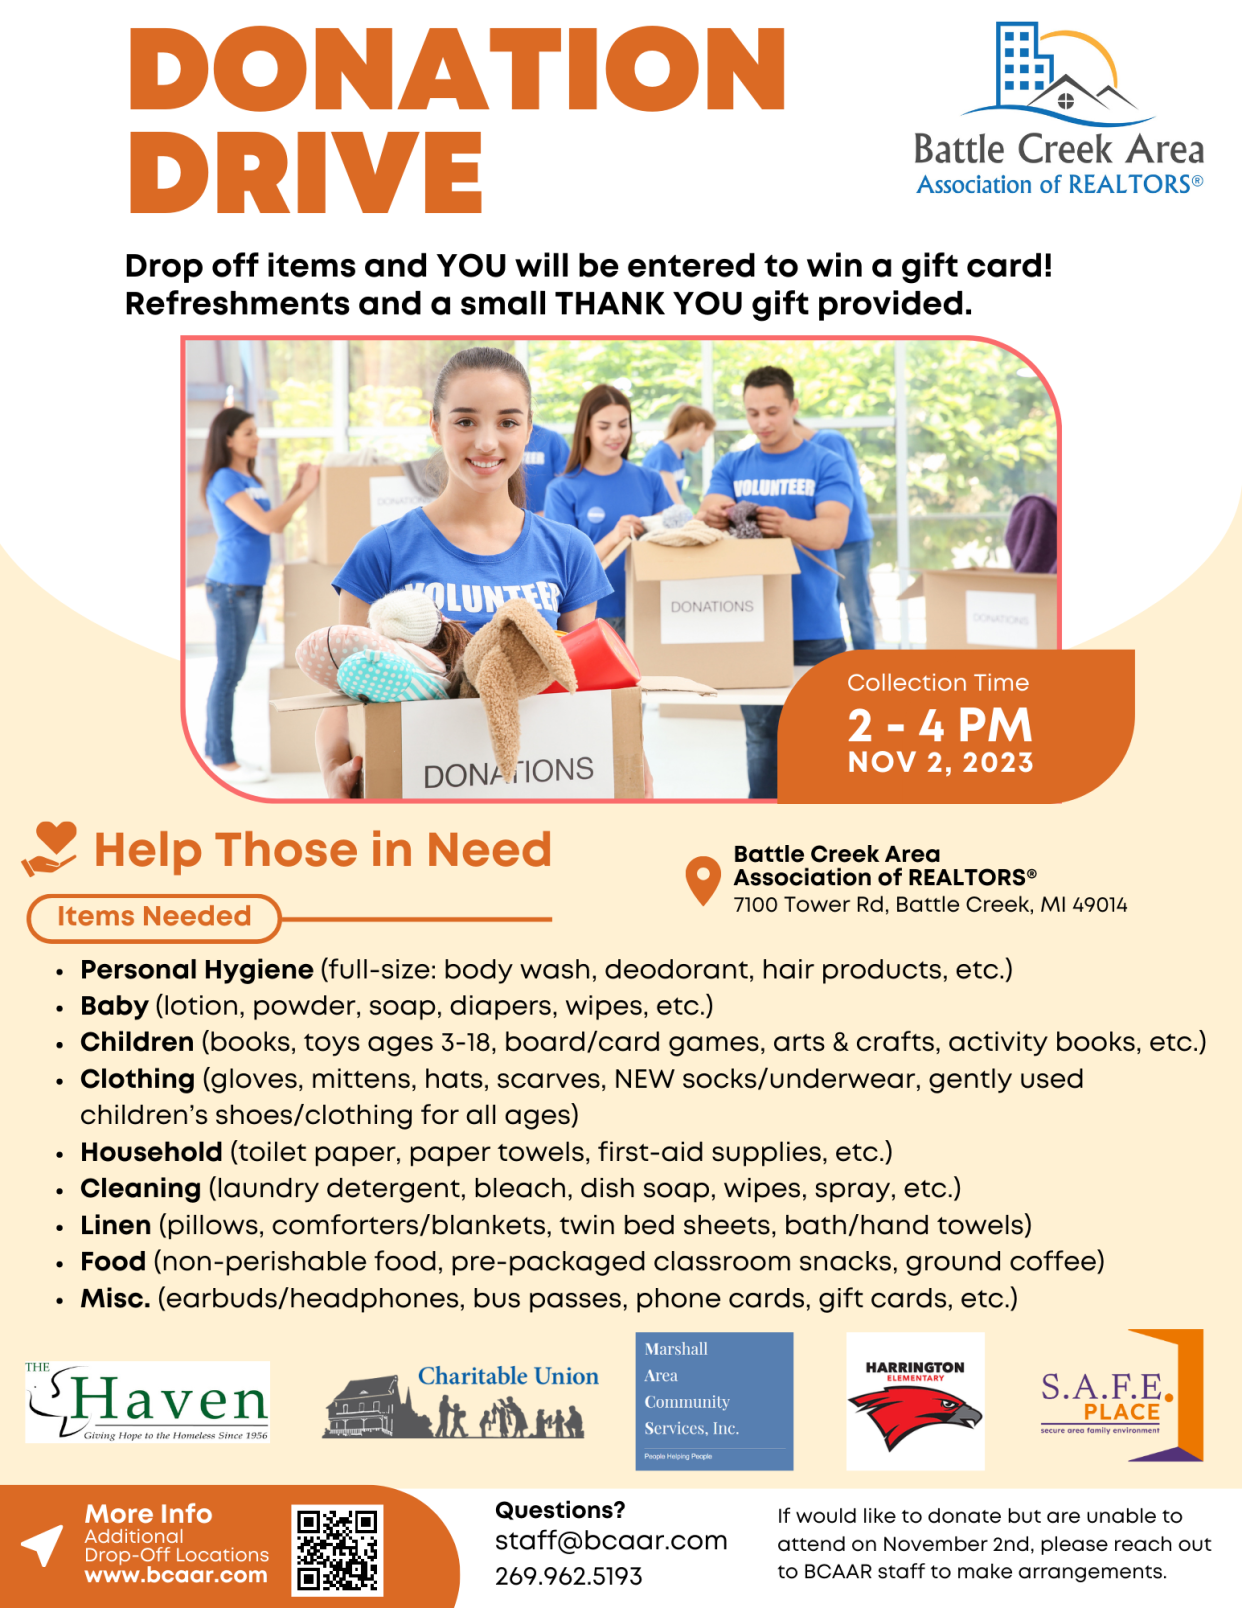 The Battle Creek Area Association of Realtors is once again hosting a donation drive to support local nonprofit organizations.